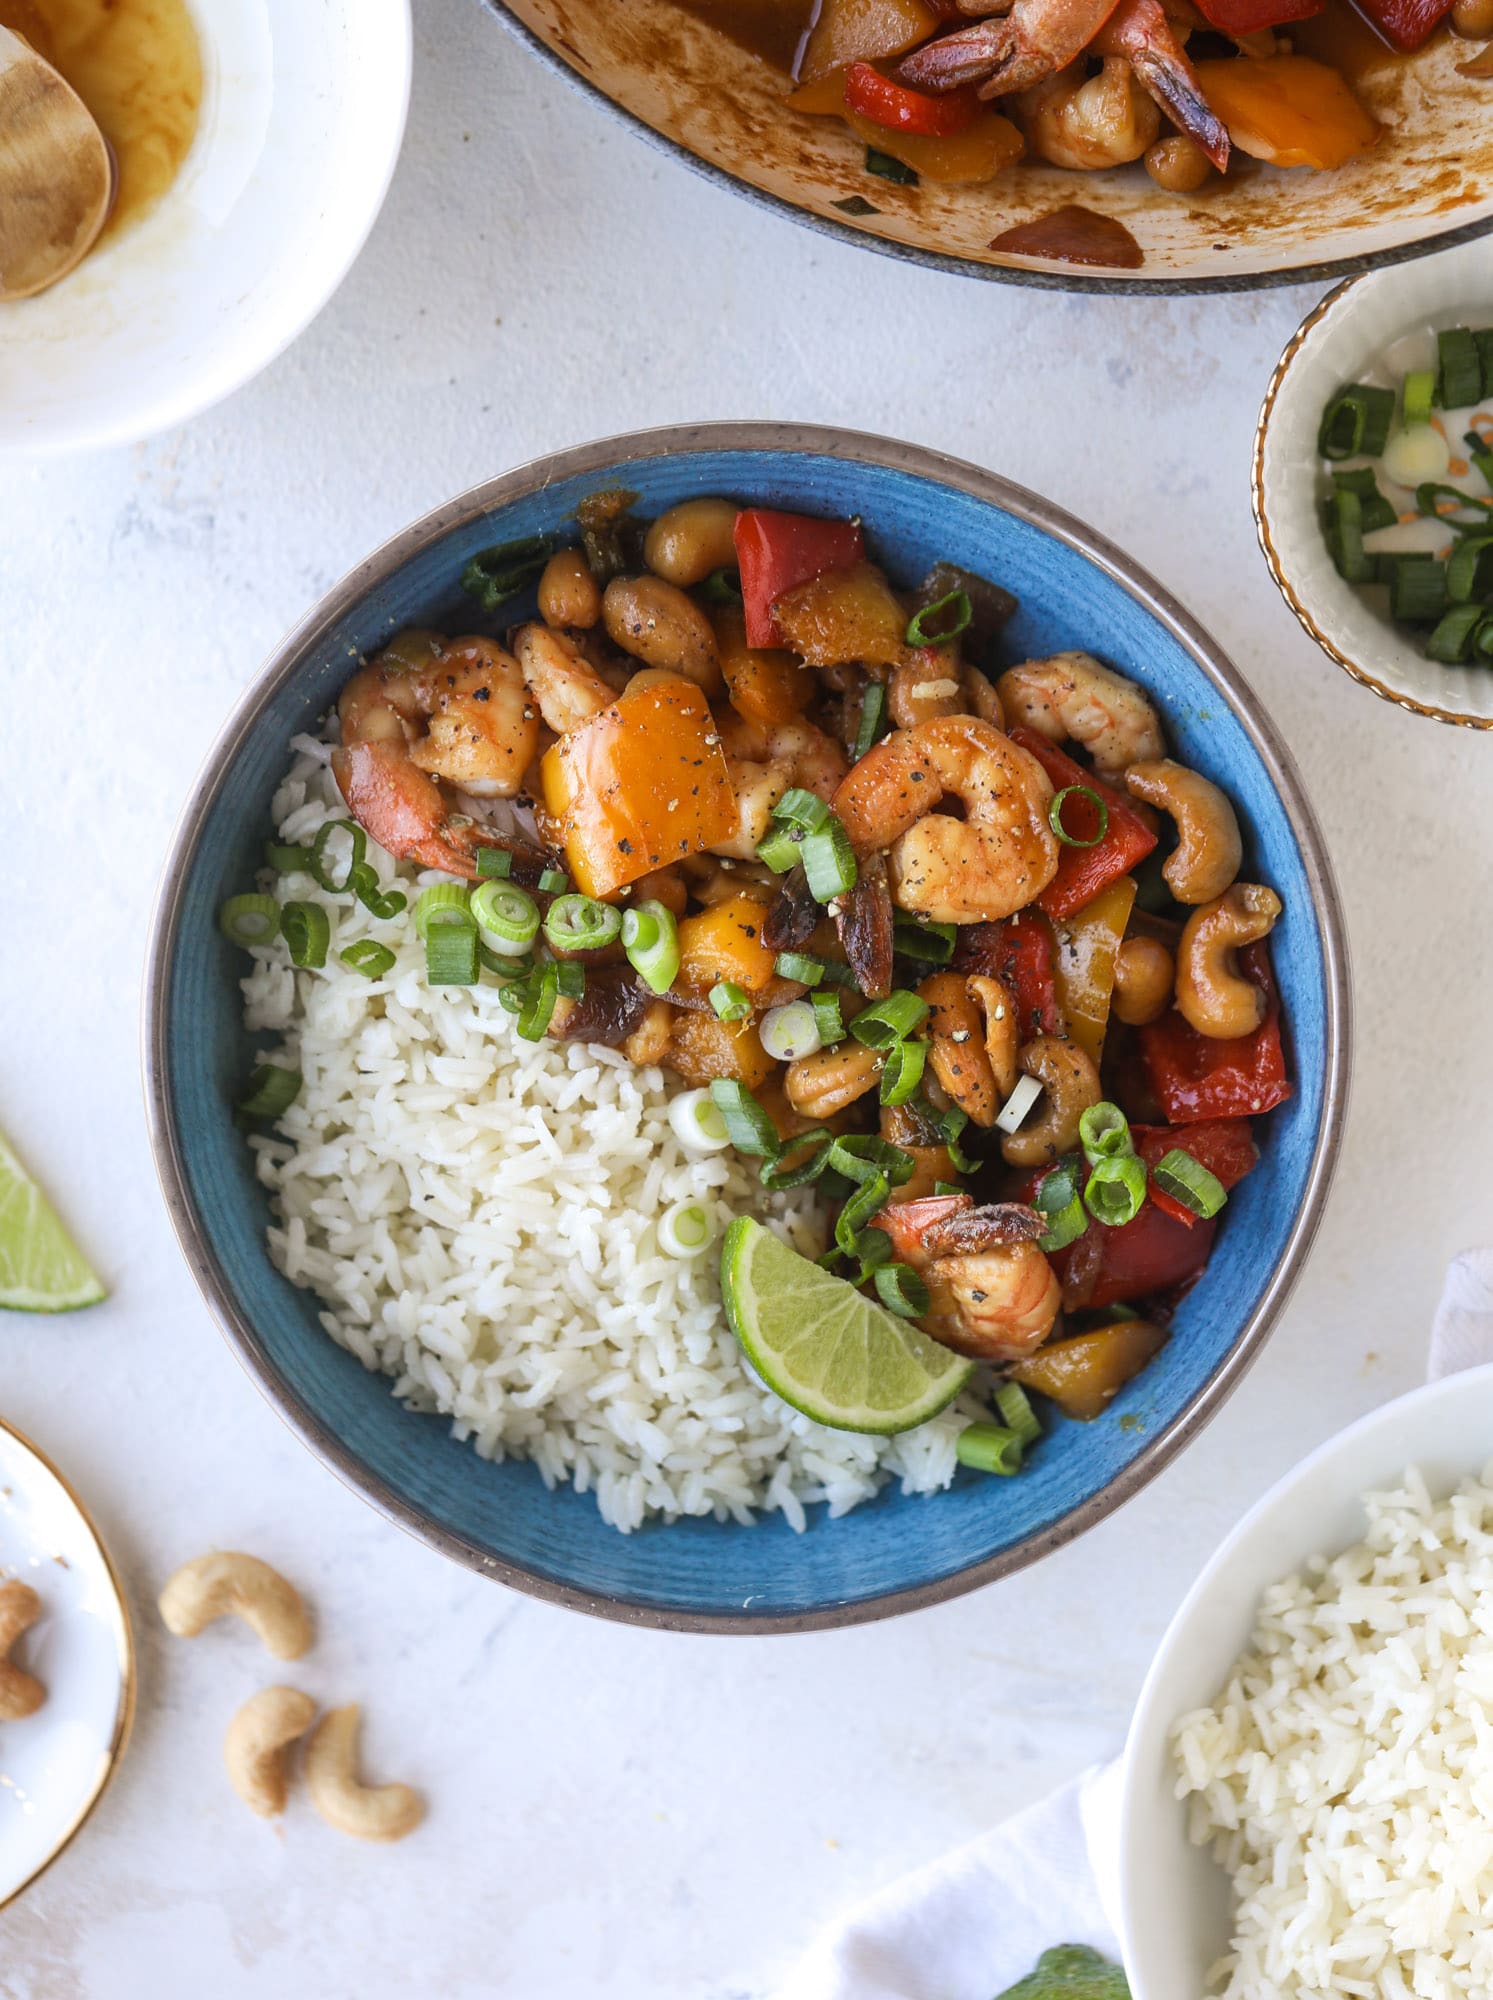 This cashew shrimp stir fry is a super simple weeknight meal! Made with bell peppers and mango, it is delicious over rice and comes together in 25 minutes. I howsweeteats.com #cashew #shrimp